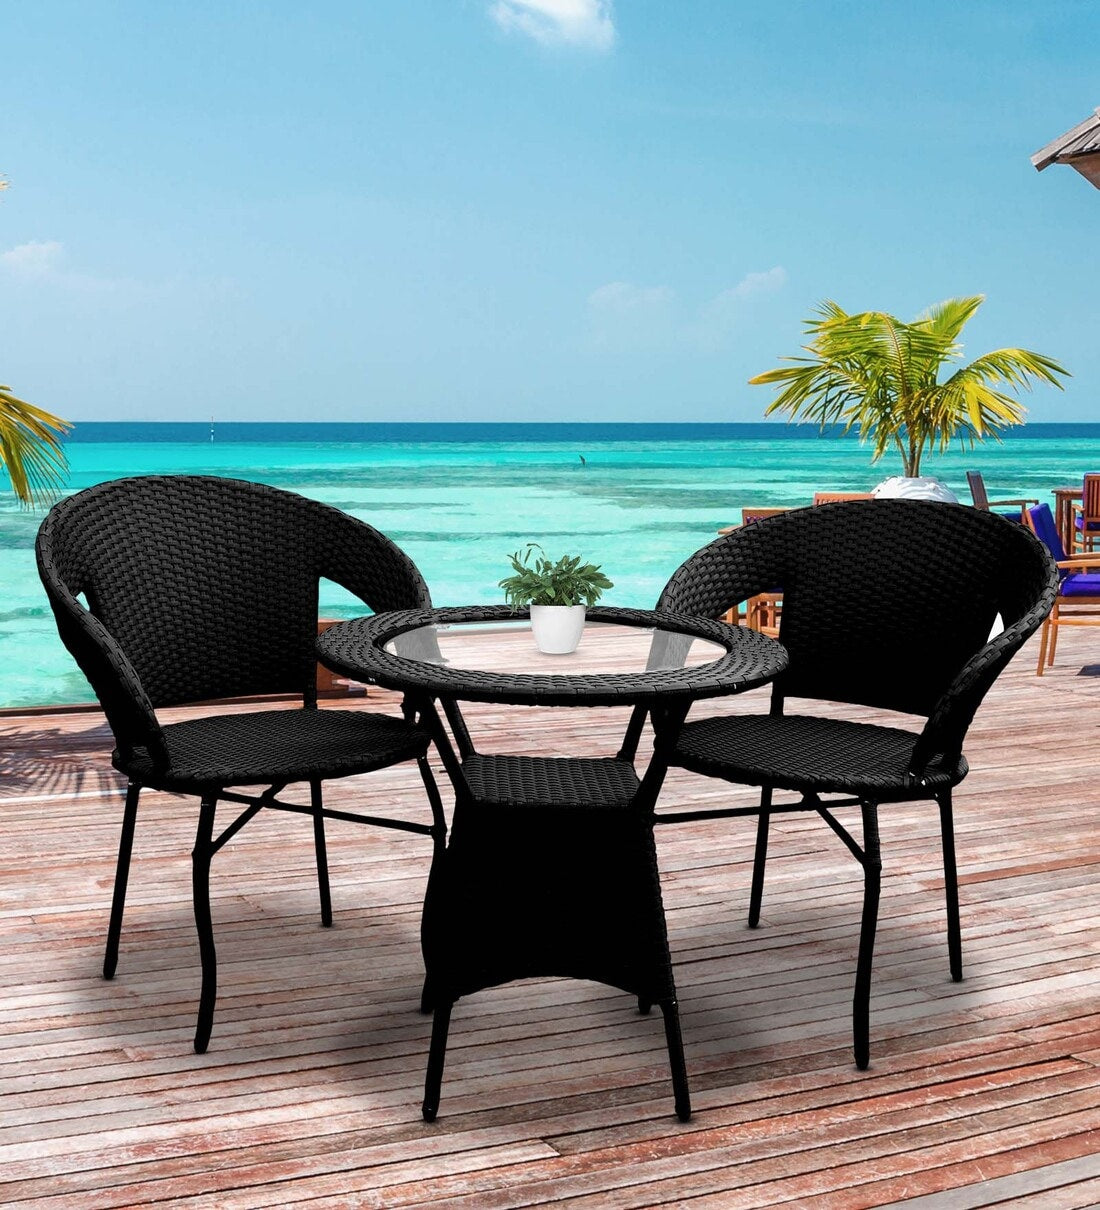 Dreamline Outdoor Furniture Garden Patio Seating Set 1+2 2 Chairs and Table Set Balcony Furniture Coffee Table Set (Black)